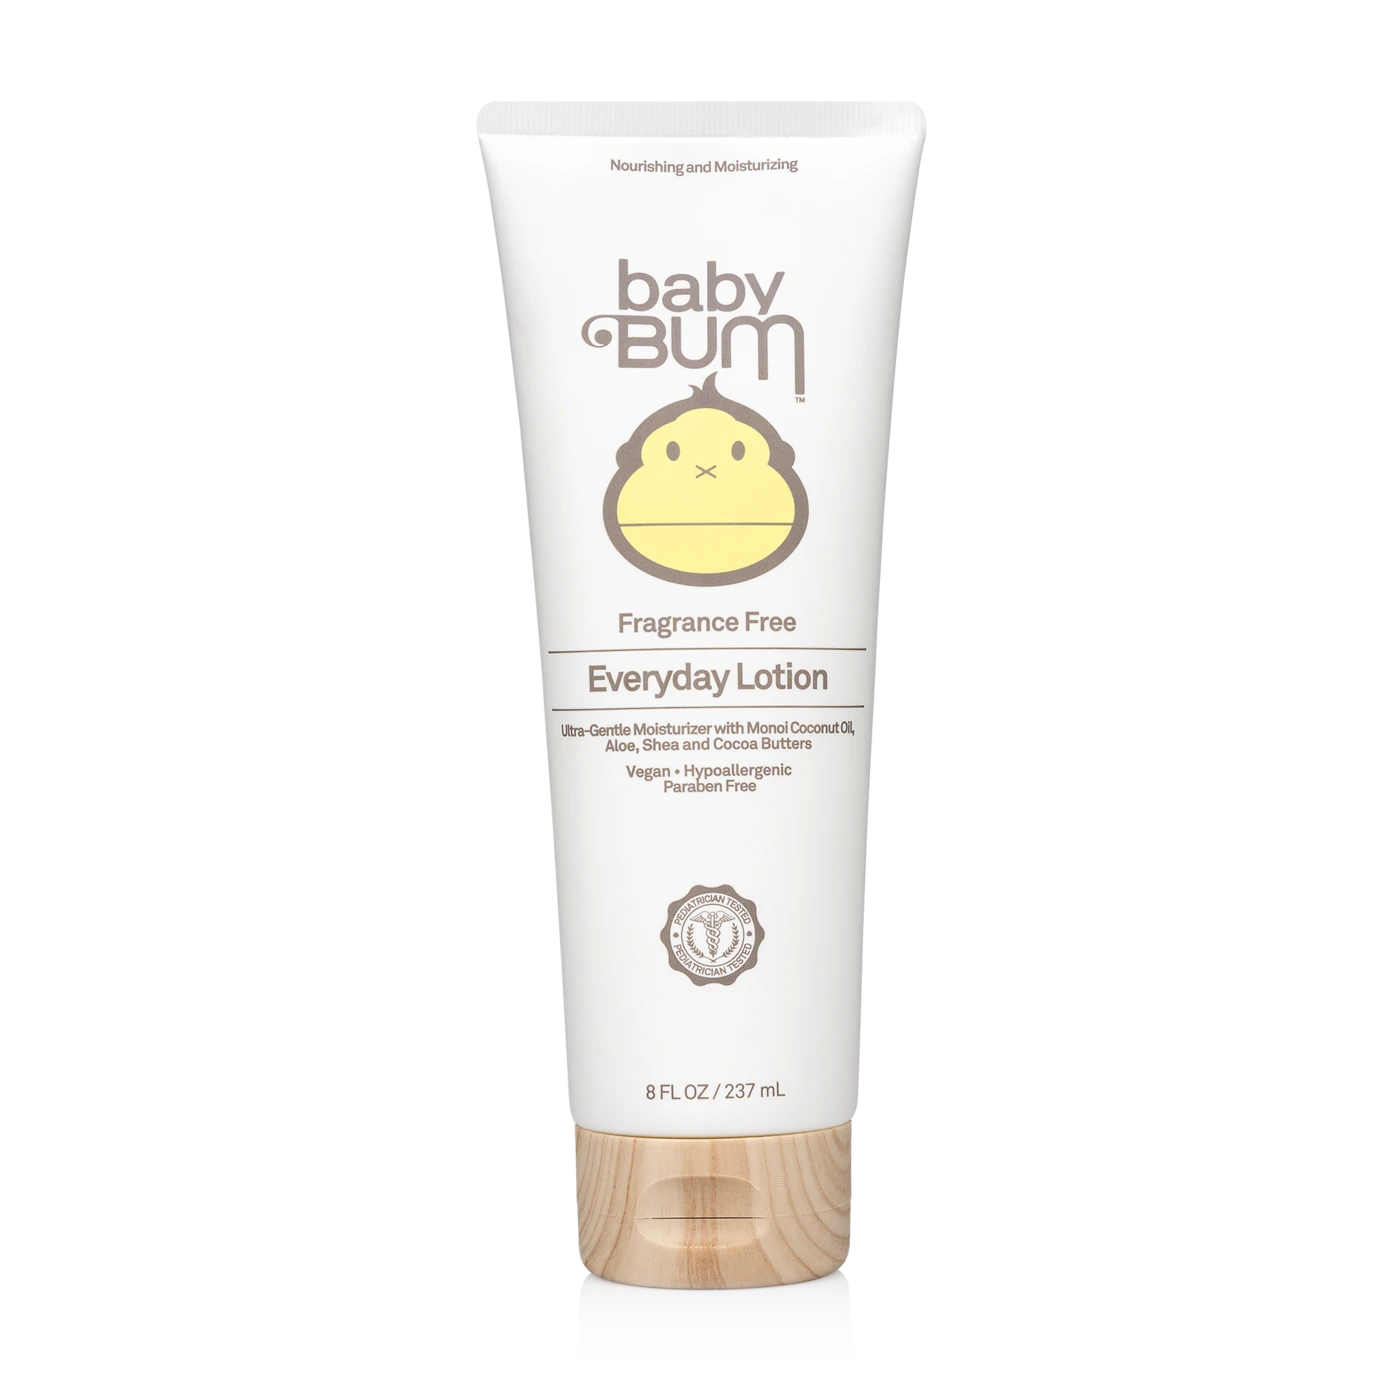 Baby_Bum_Everyday_Lotion_Fragrance_Free_8_OZ_Front_21bea460-92f5-4422-919c-7c90a9bdb501_1400x1400